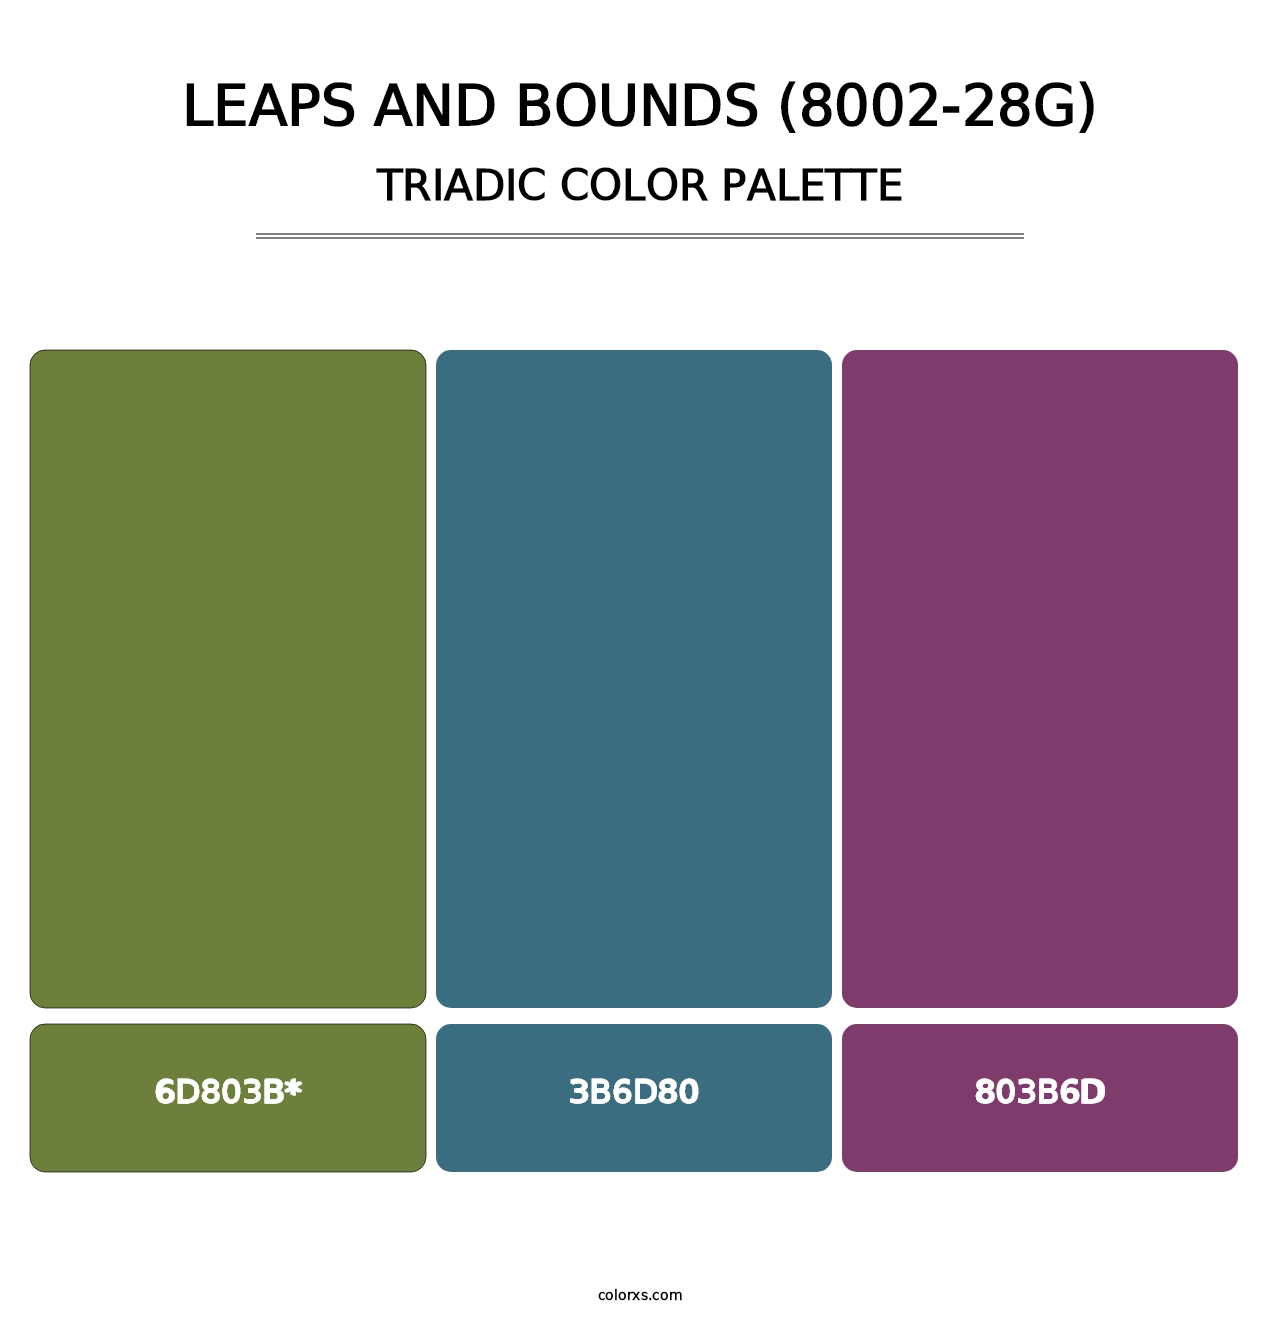 Leaps and Bounds (8002-28G) - Triadic Color Palette